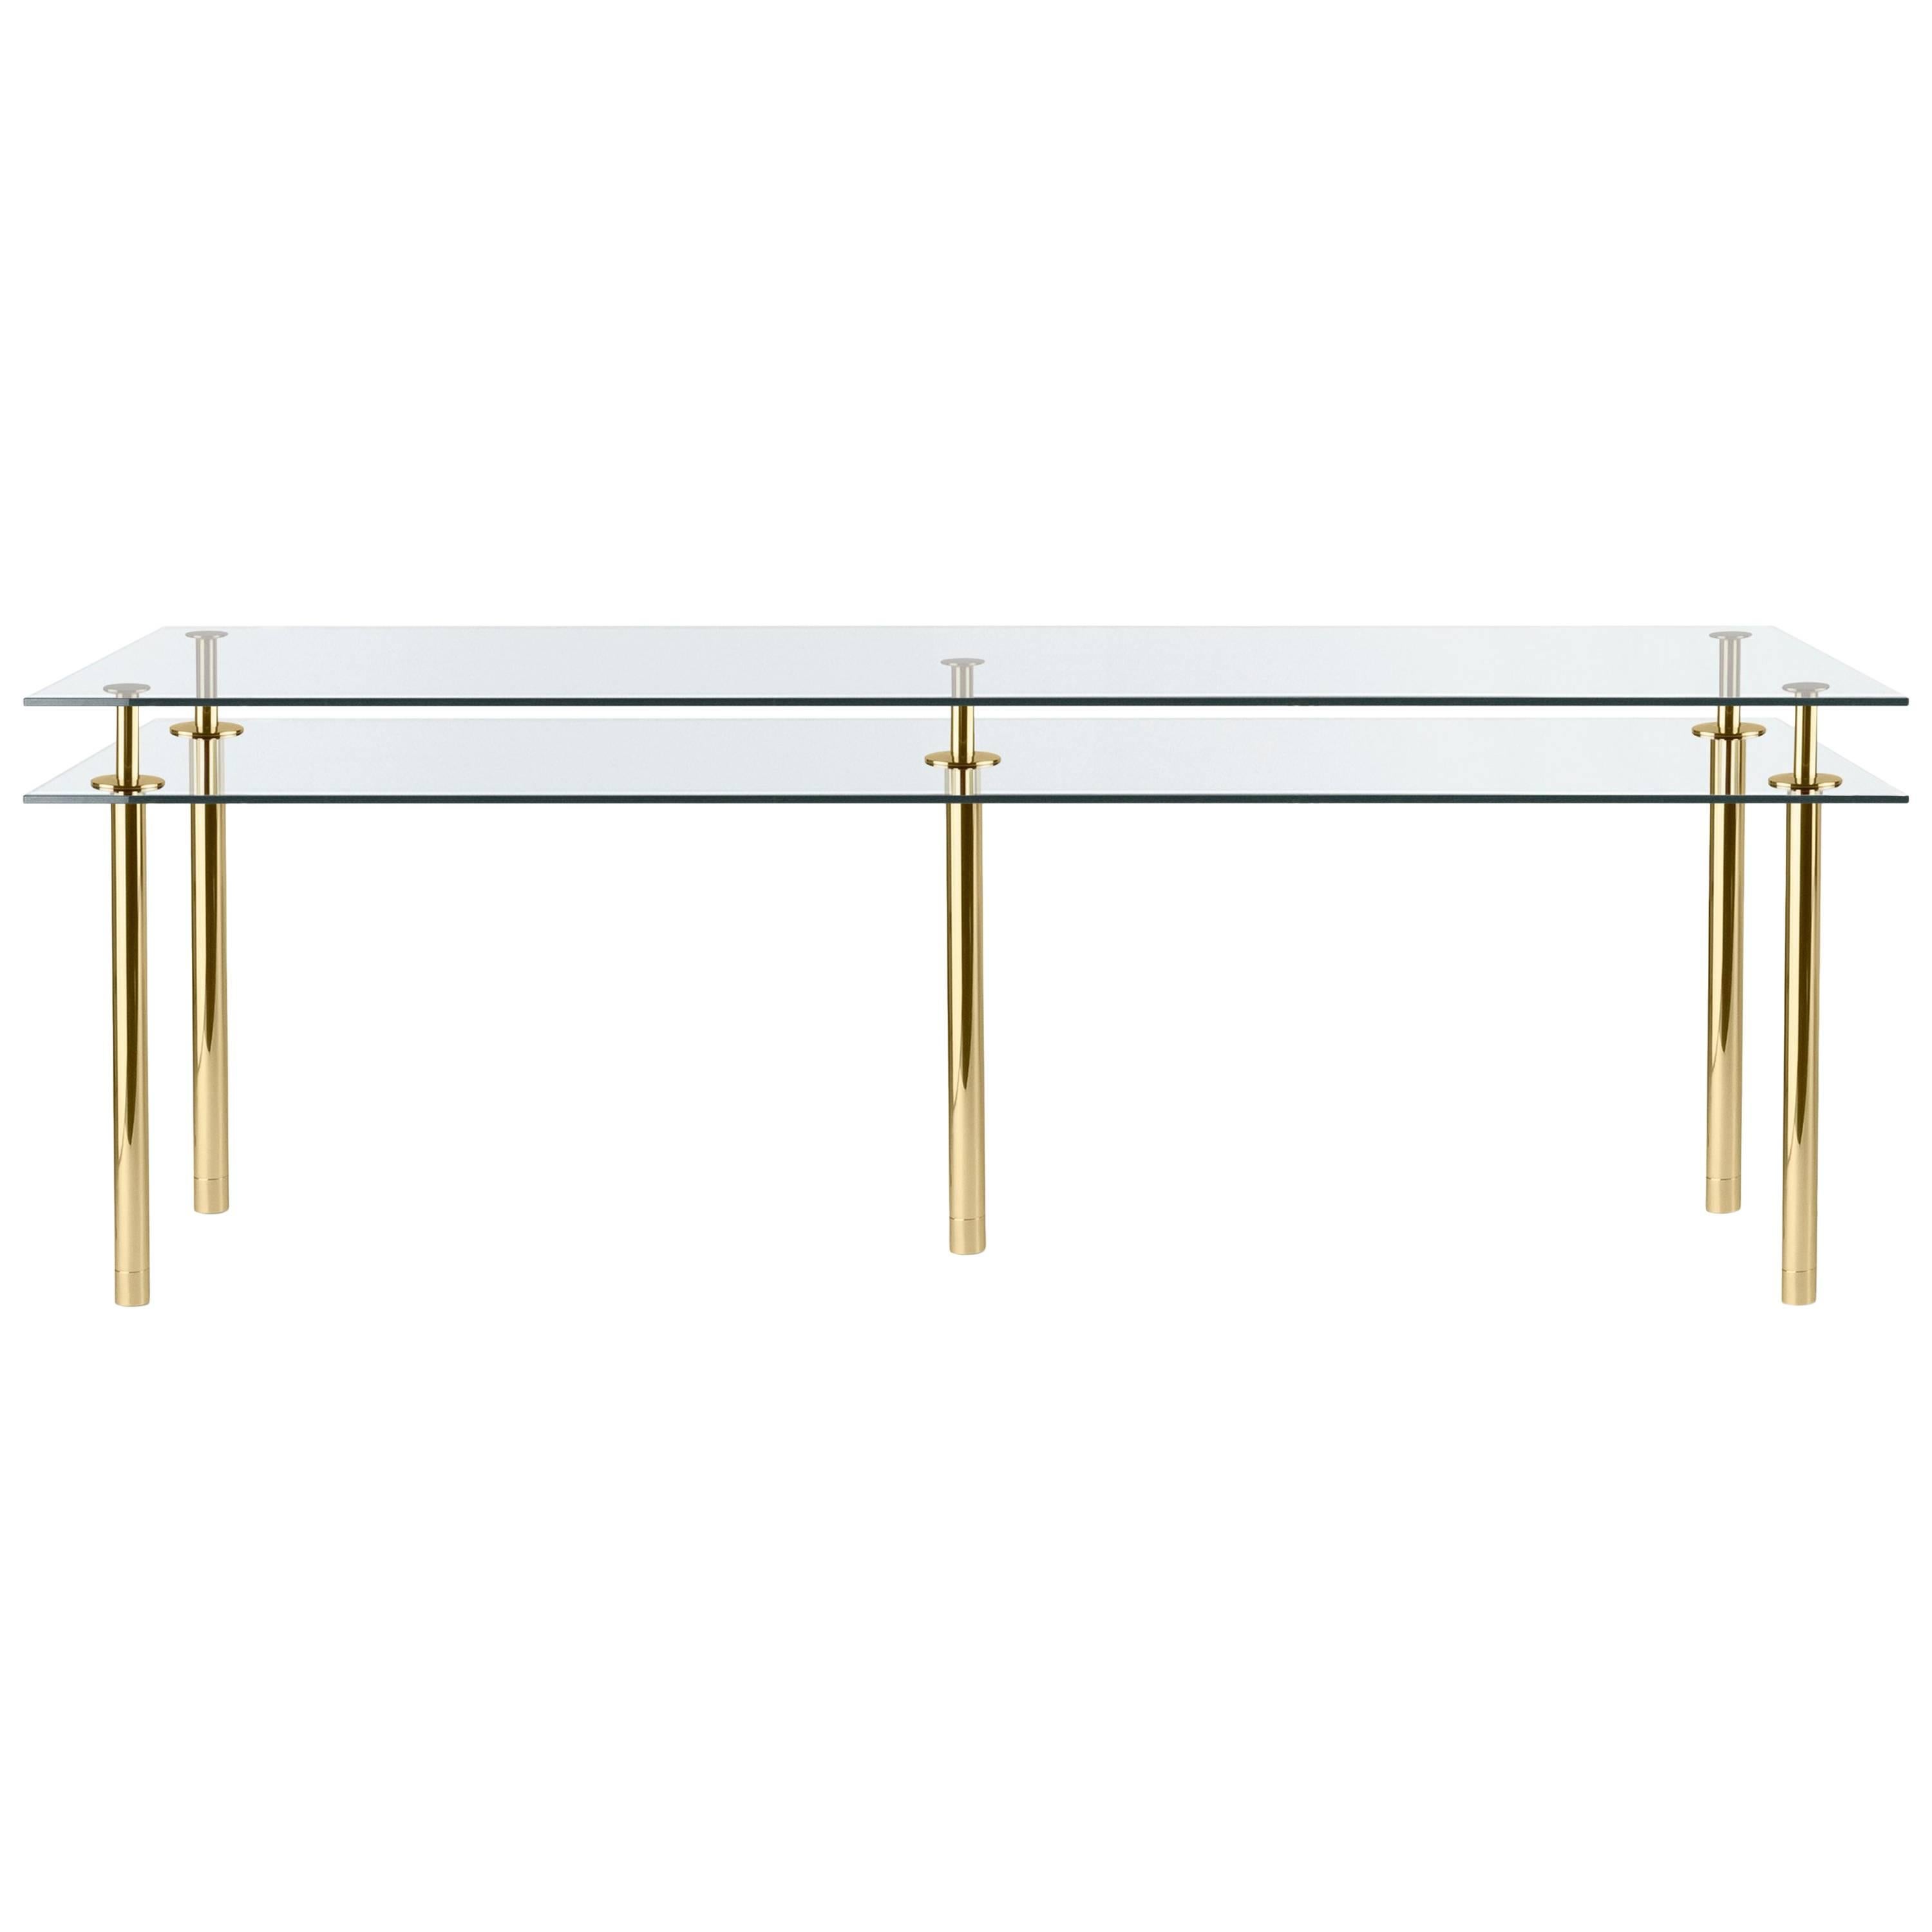 Ghidini 1961 Legs Large Rectangular Table in Crystal and Polished Brass